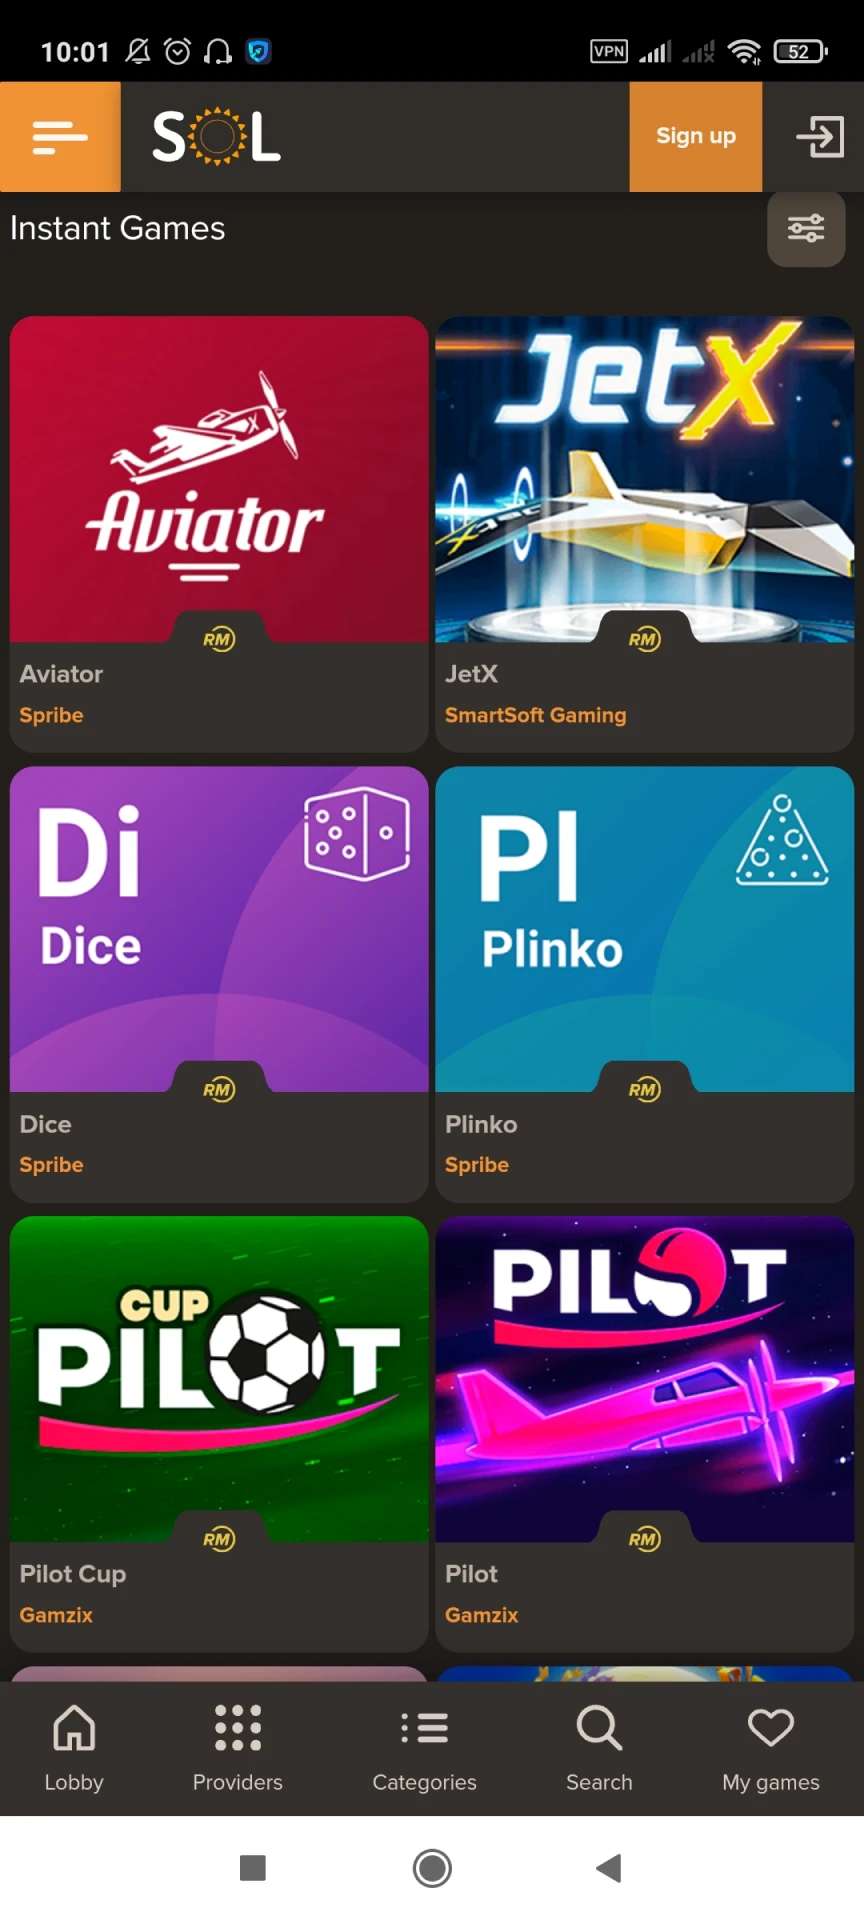 Visit the Sol Casino app games page.